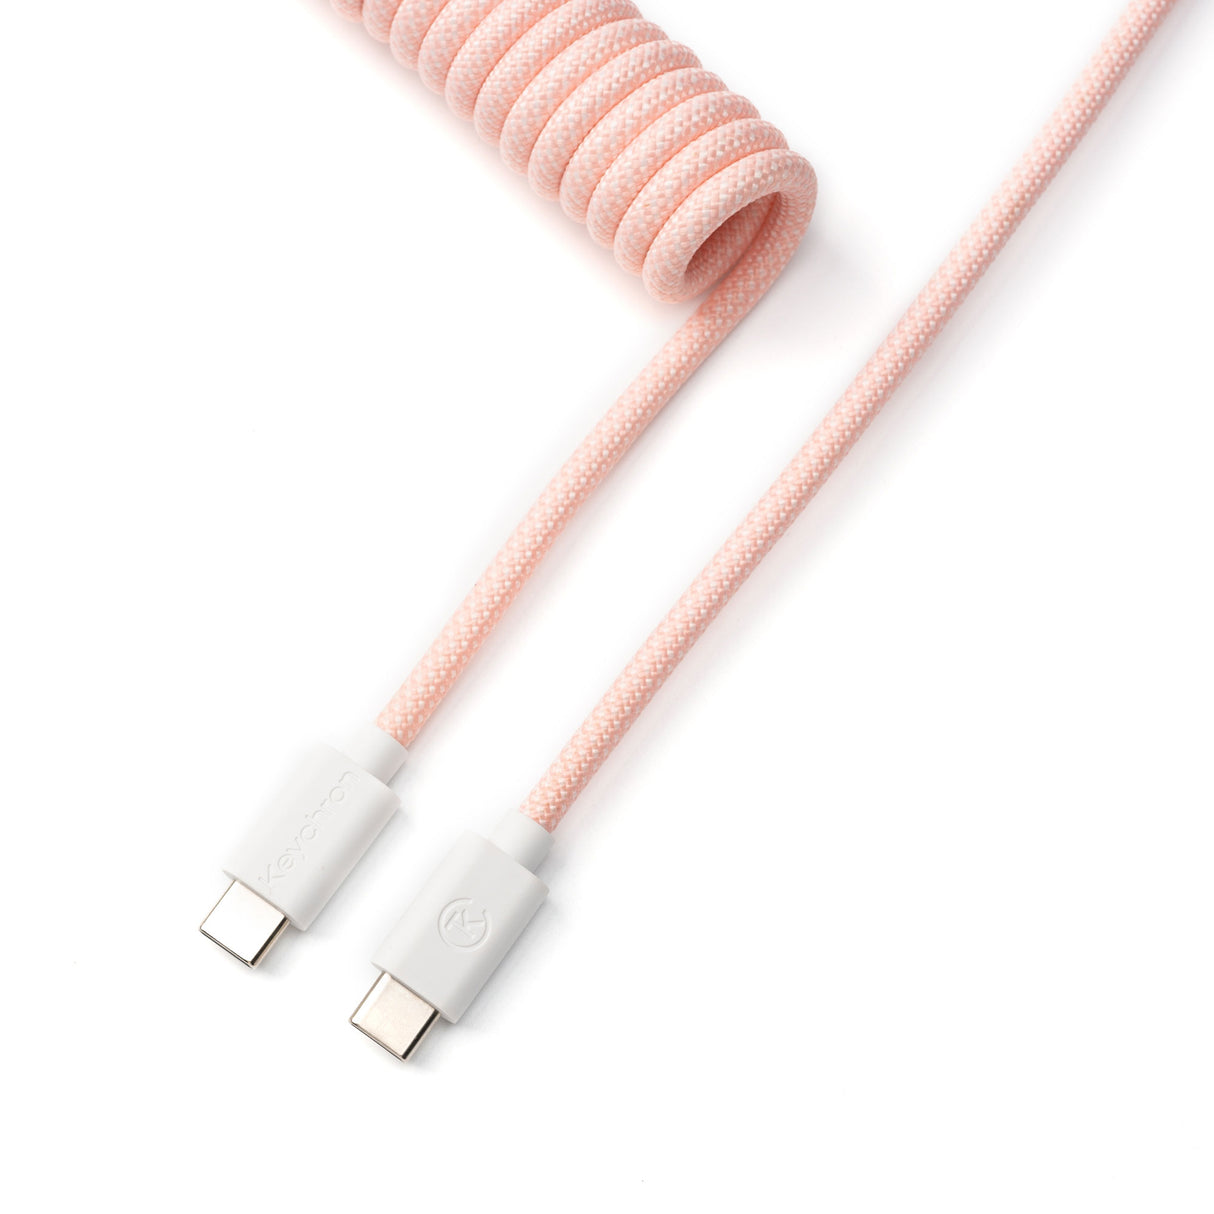 Custom Keyboard Cables - What You Should Know (Mechanical Keyboards) 